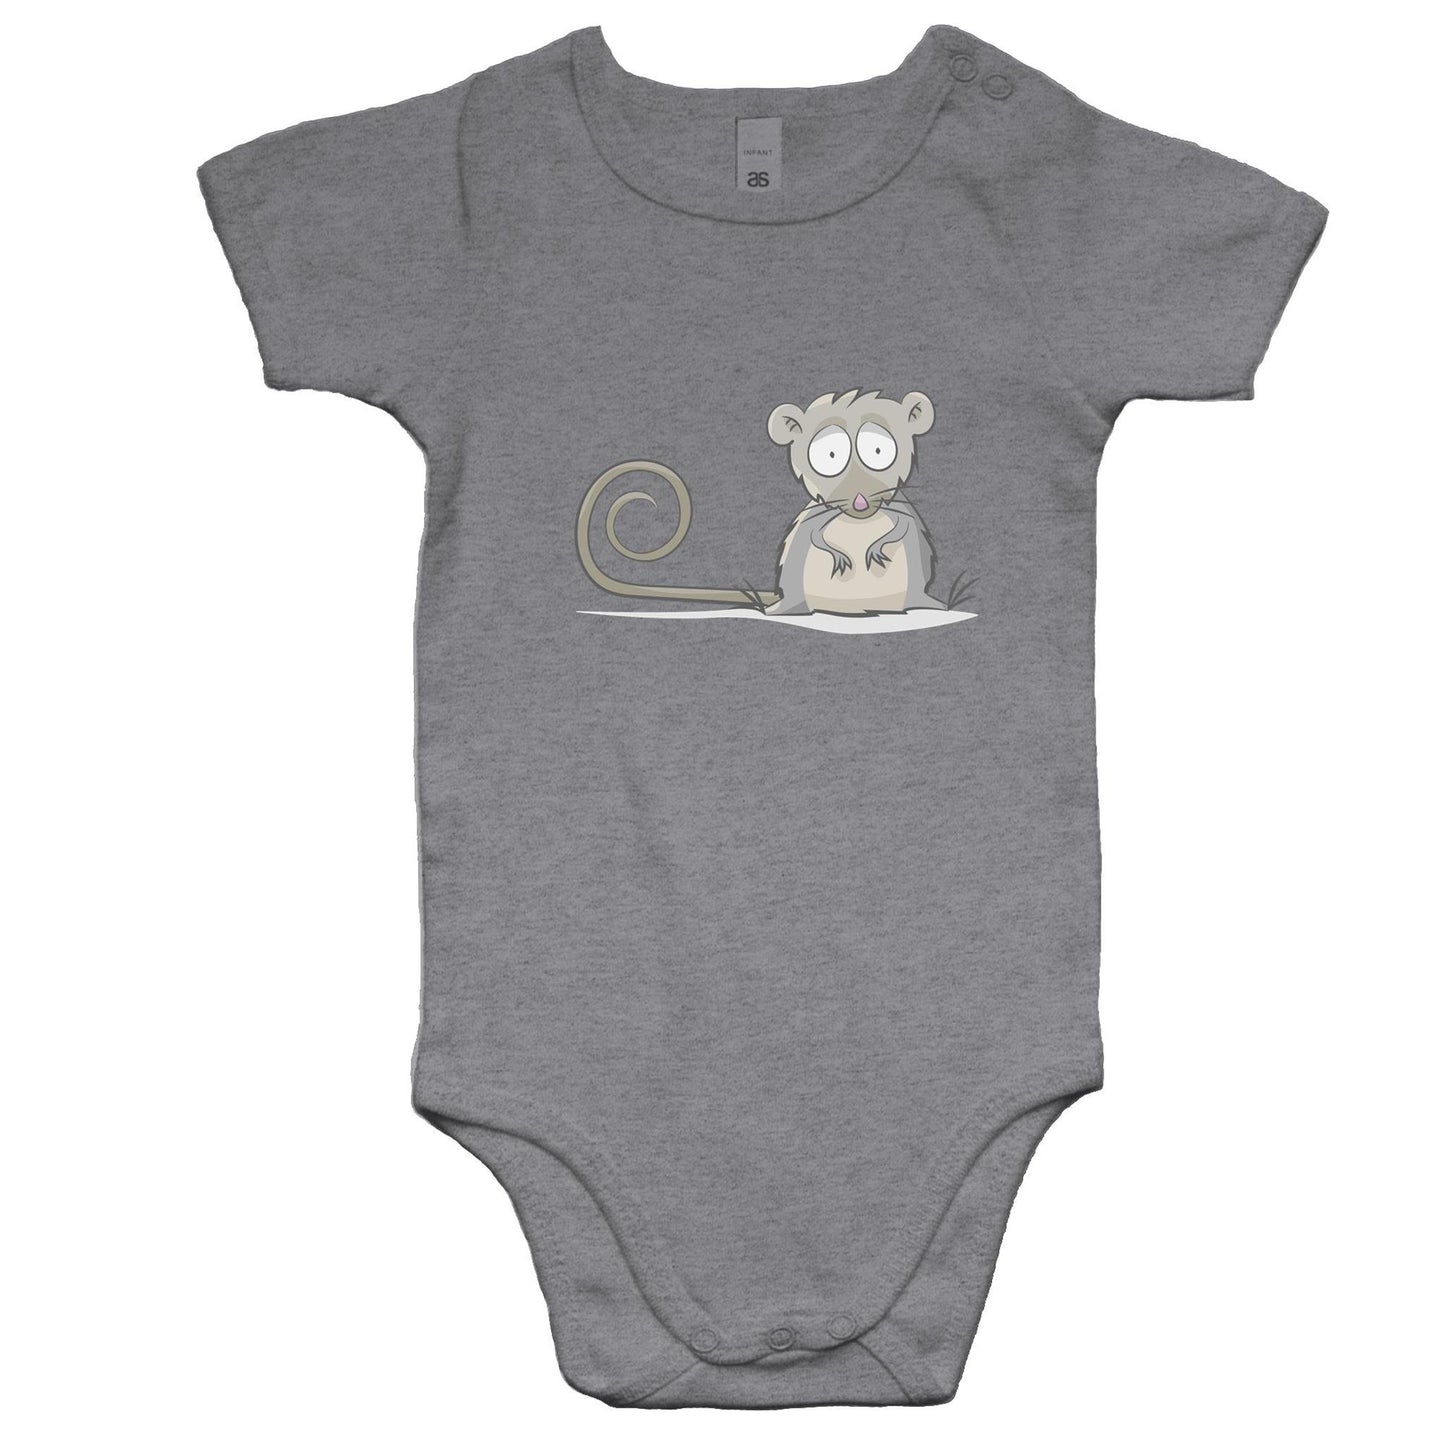 A grey baby romper suit with a printed seated mountain pygmy possum toon